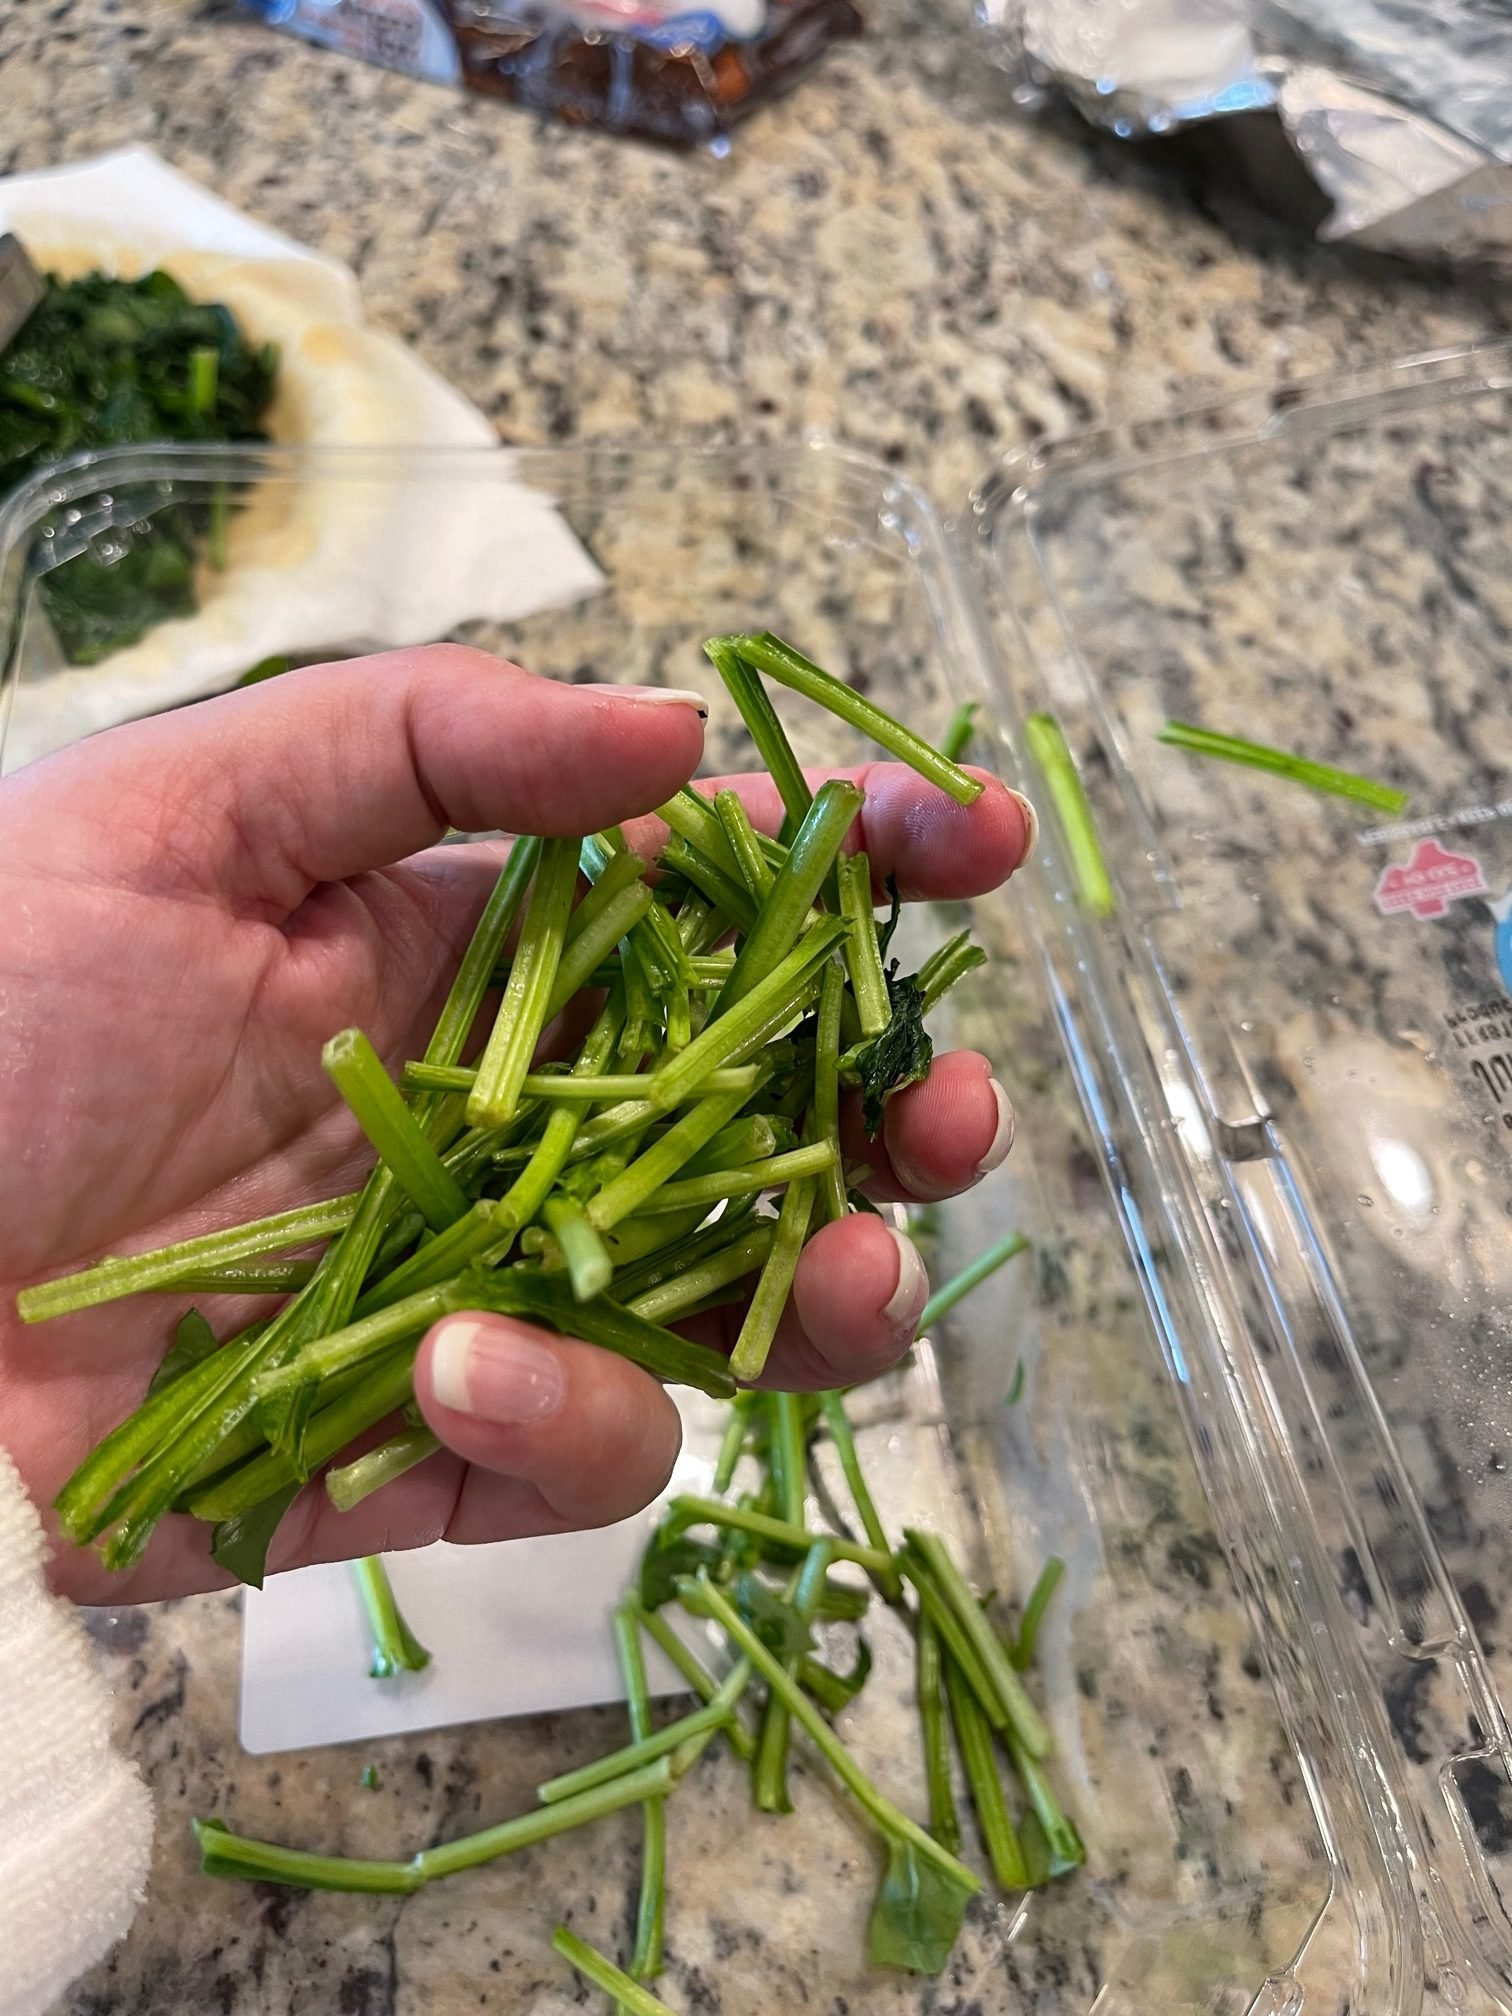 Handful of stems cut off of the spinach leaves before cooking